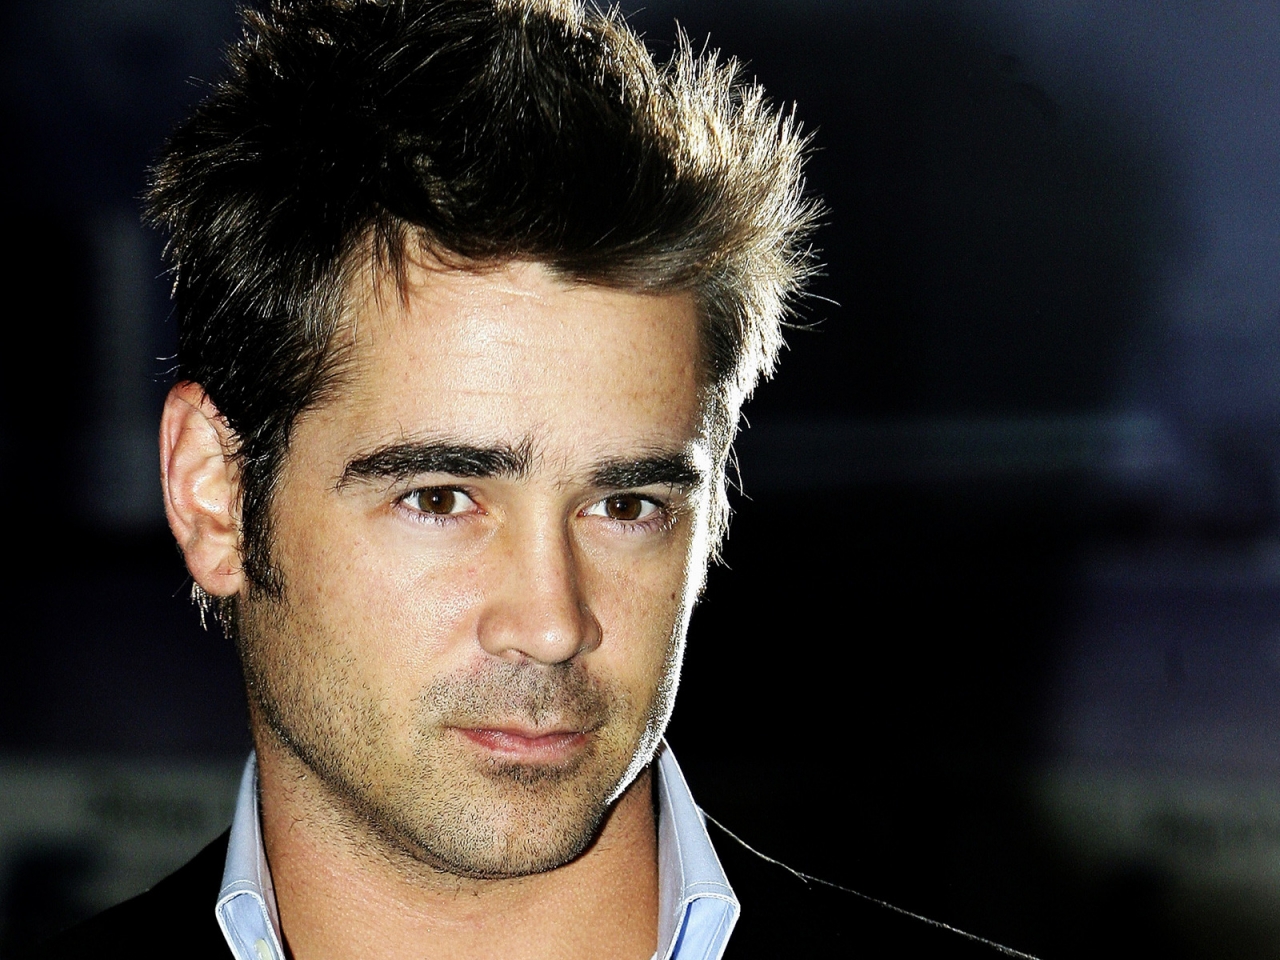 Colin James Farrell for 1280 x 960 resolution